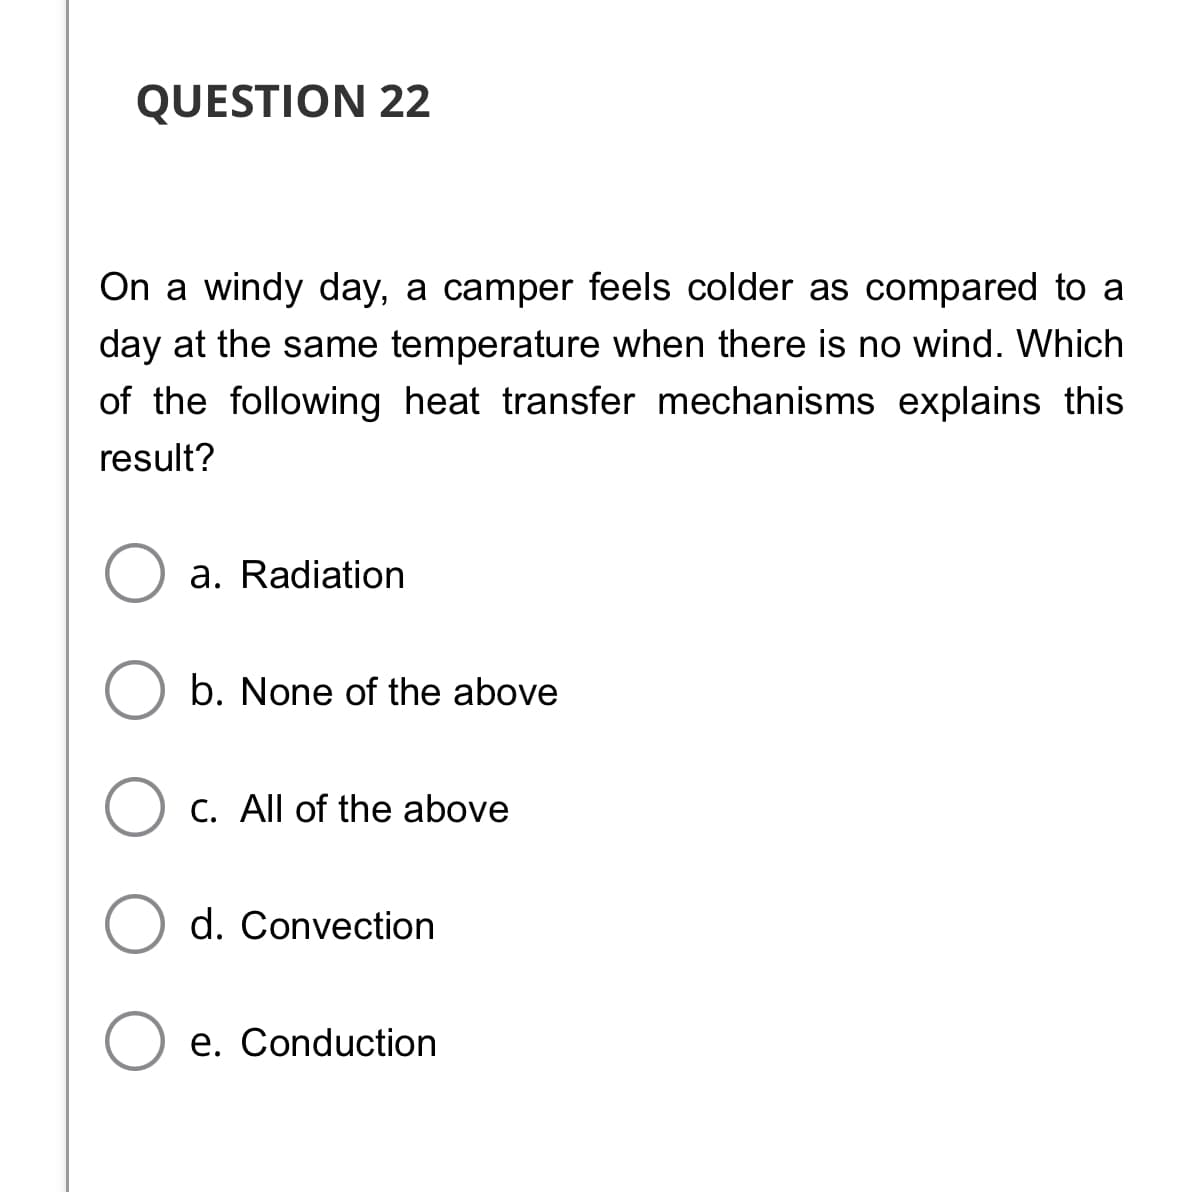 QUESTION 22
On a windy day, a camper feels colder as compared to a
day at the same temperature when there is no wind. Which
of the following heat transfer mechanisms explains this
result?
a. Radiation
b. None of the above
C. All of the above
d. Convection
e. Conduction
